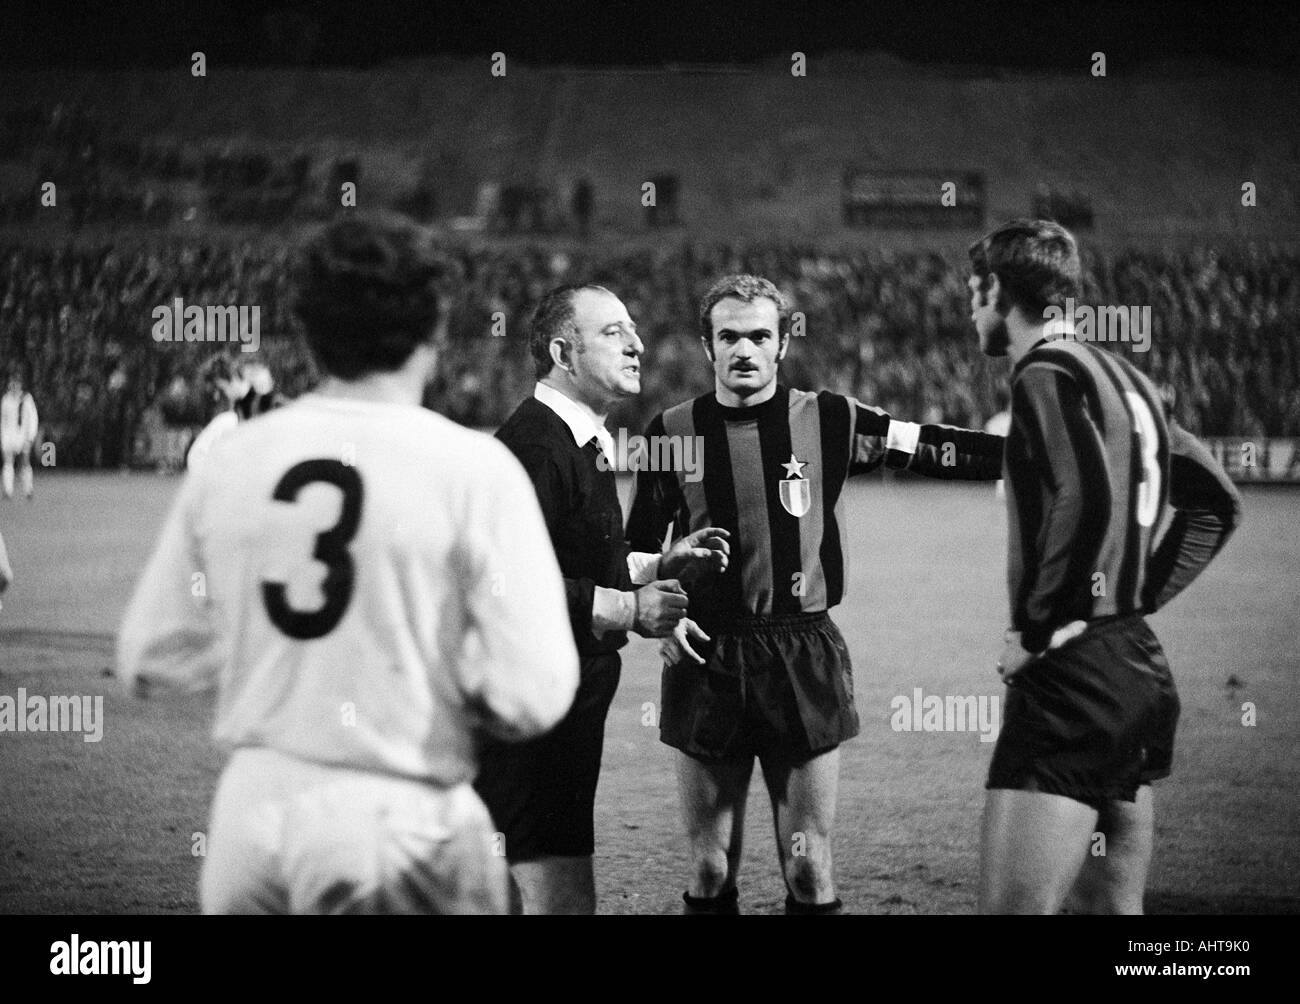 football, European Cup, 1971/1972, eighth final, first leg, Borussia Moenchengladbach vs Inter Mailand 7:1, Boekelberg Stadium Moenchengladbach, time-out after the throw of a Coke can, discussion, f.l. Ludwig Mueller (MG, 3), referee Doorpmans, Netherland Stock Photo